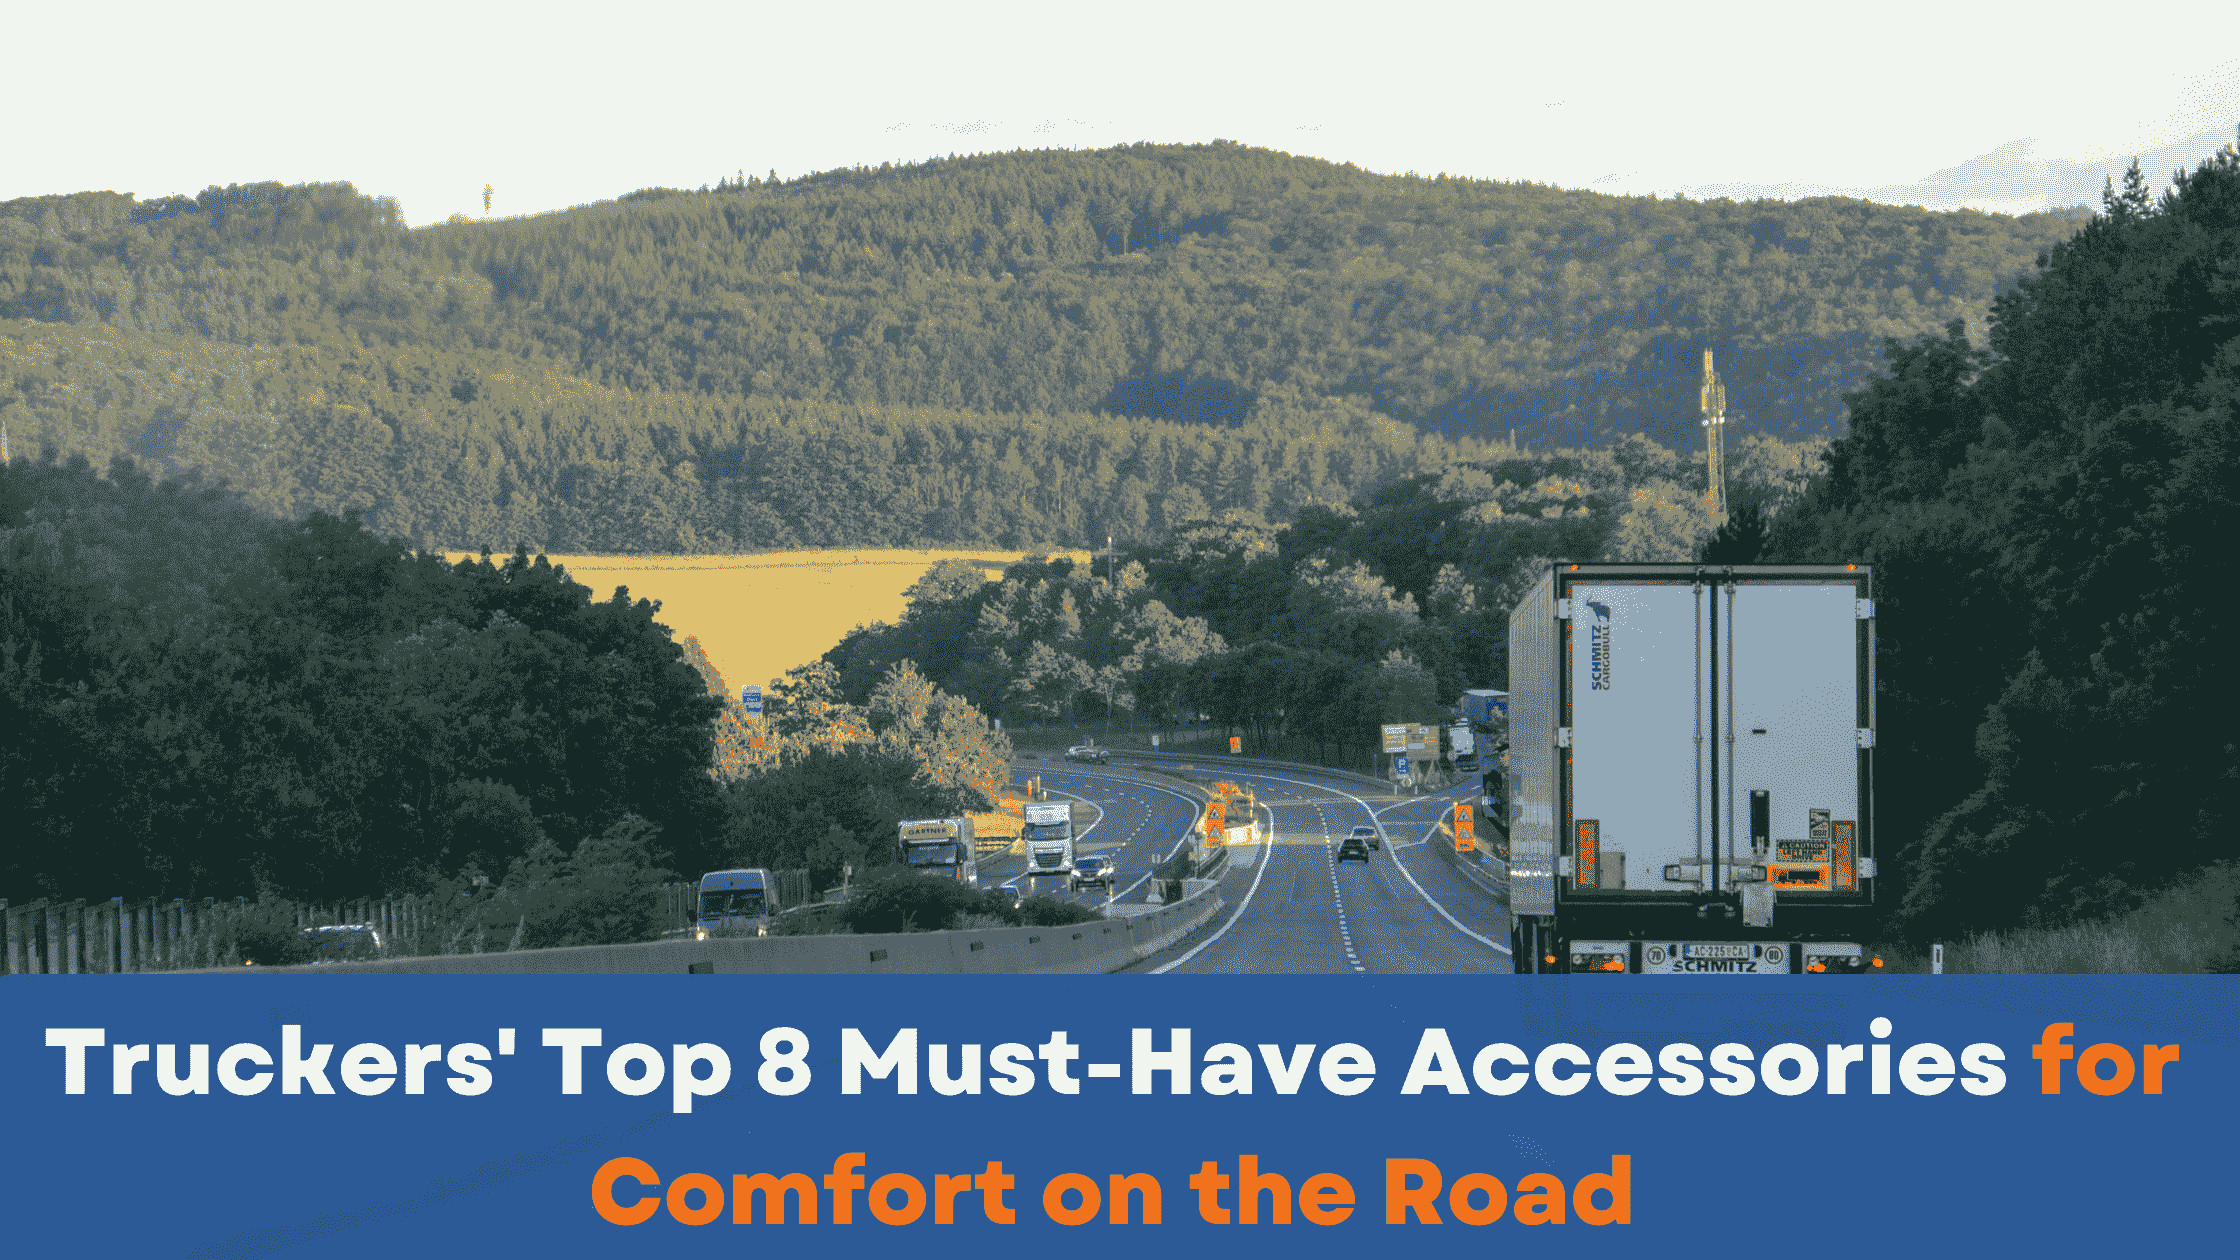 Truckers' Top 8 Must-Have Accessories You Should Not Miss